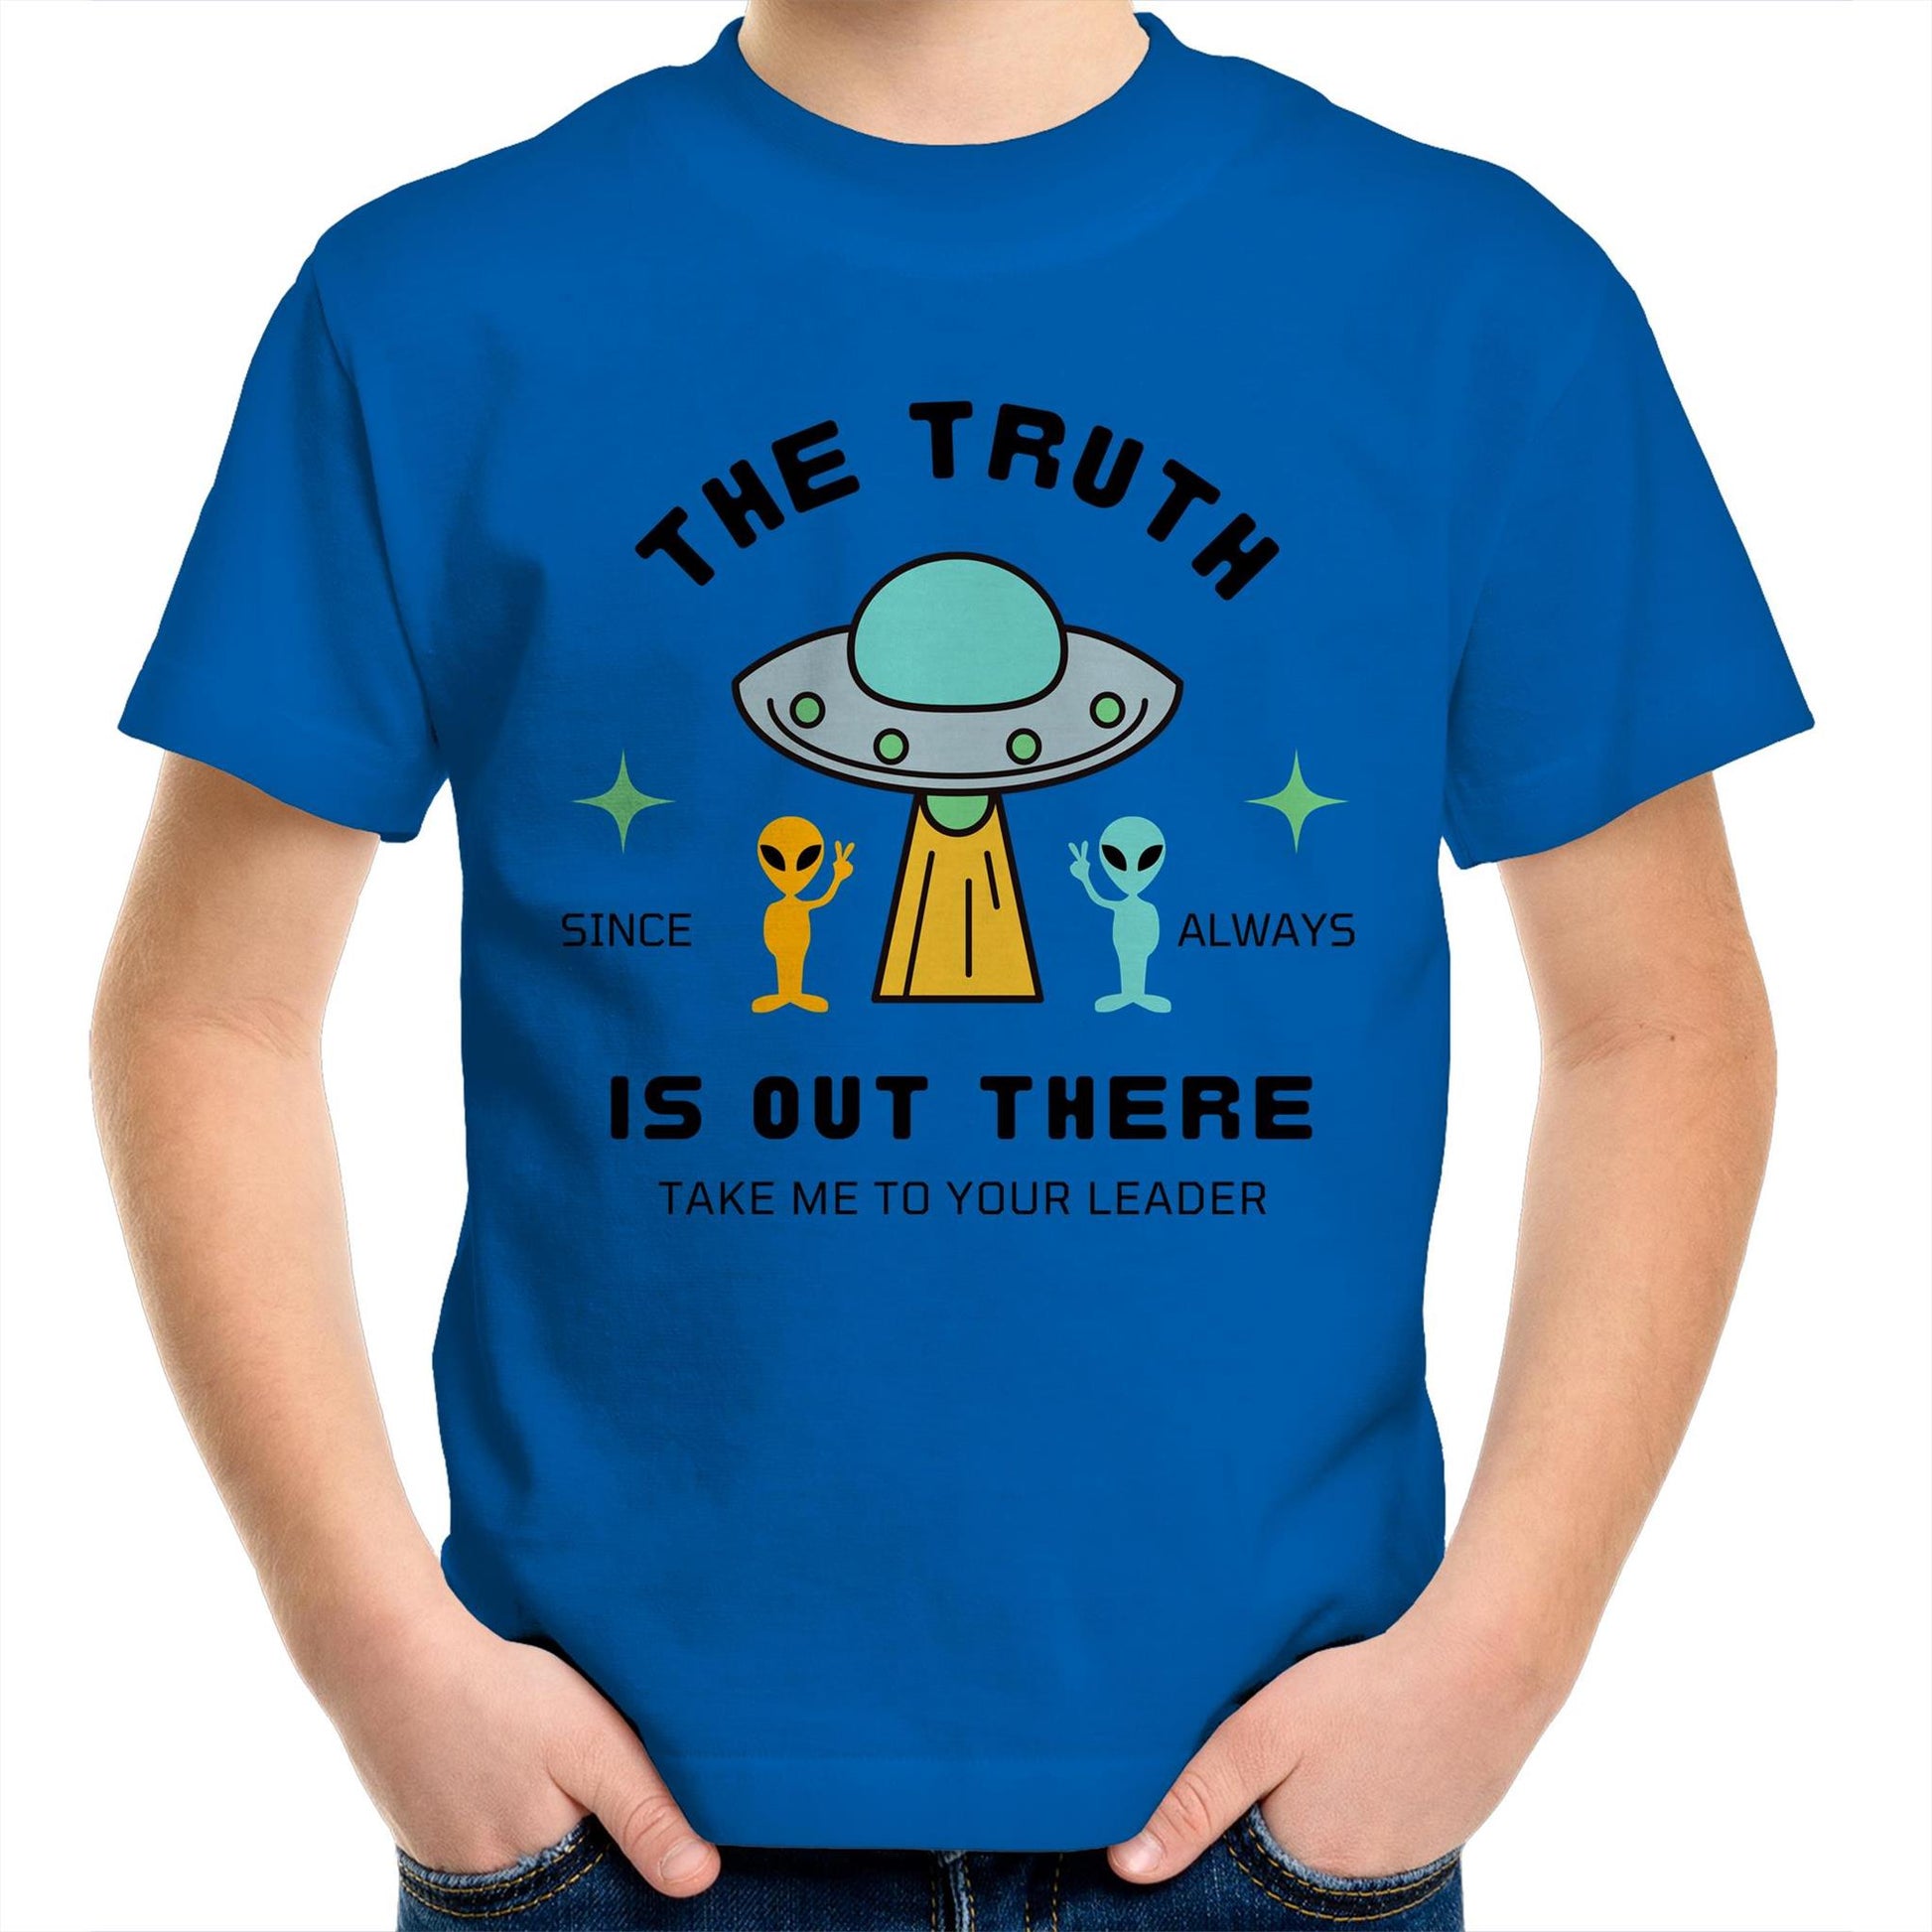 The Truth Is Out There - Kids Youth Crew T-Shirt Bright Royal Kids Youth T-shirt Sci Fi